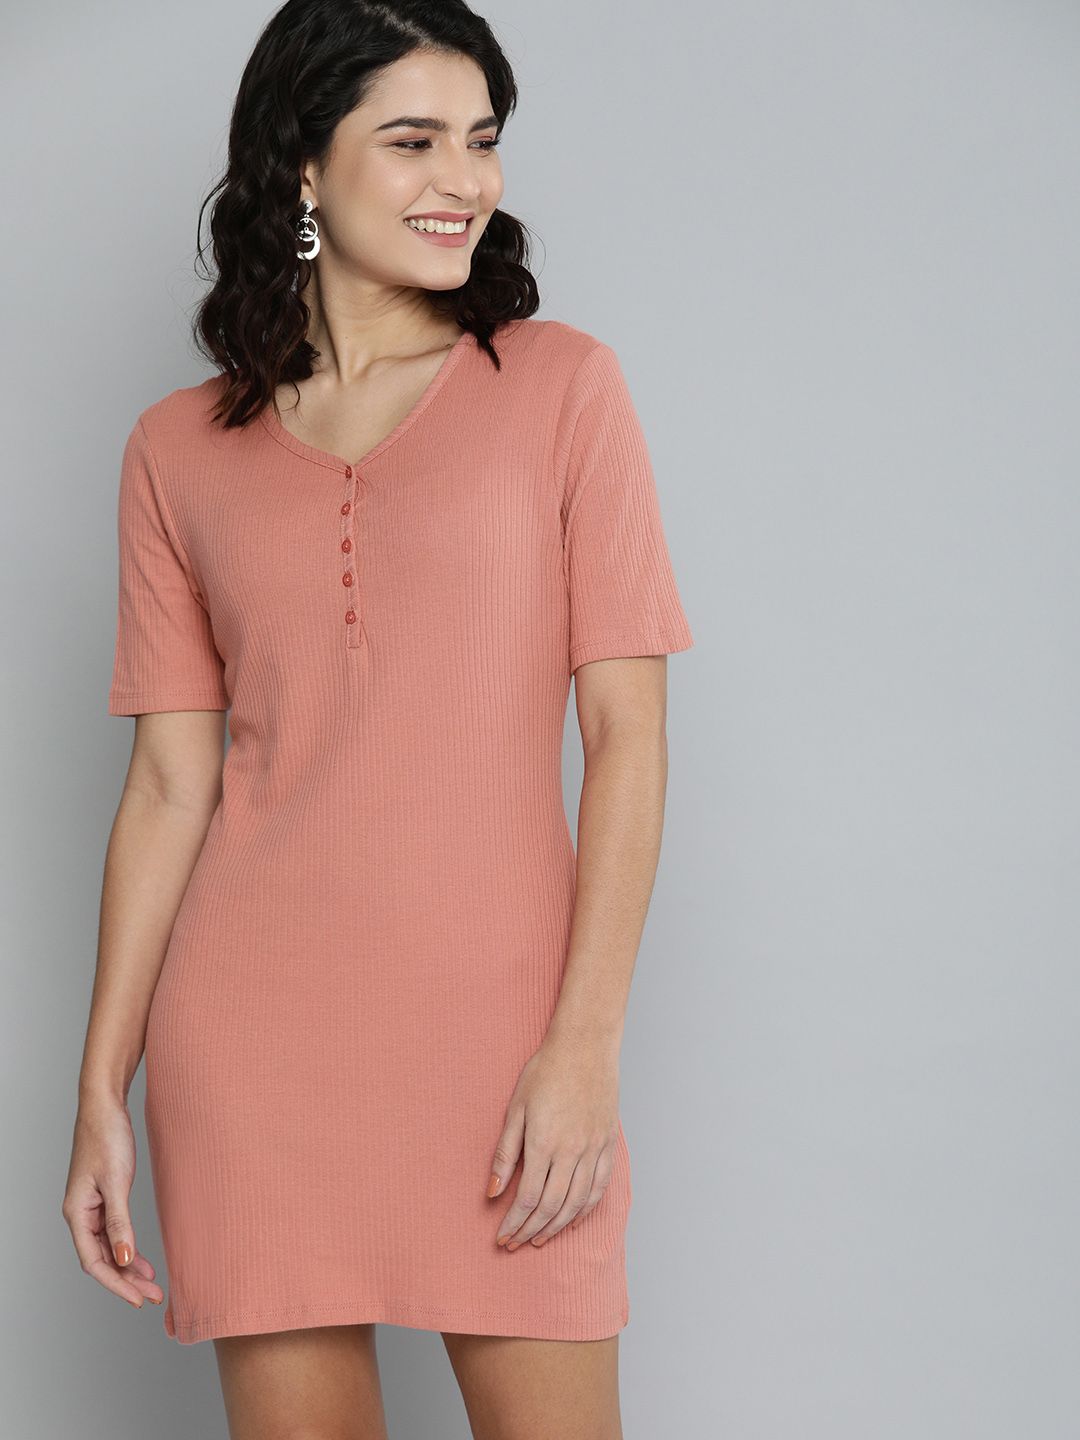 HERE&NOW Peach-Coloured Ribbed Sheath Mini Dress Price in India